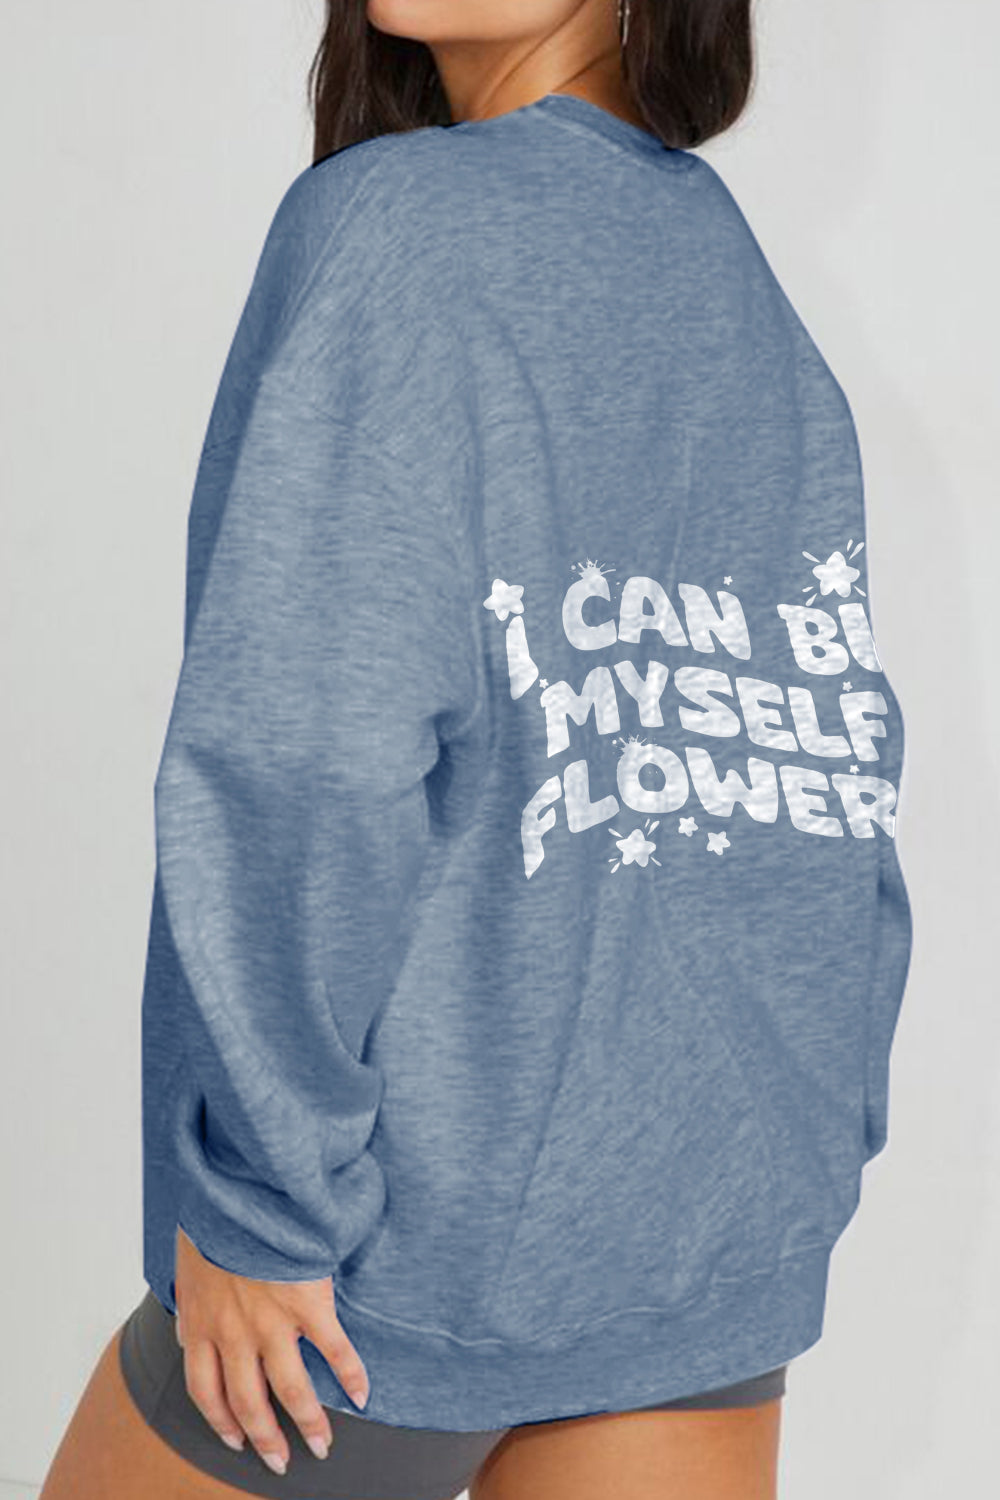 POSHOOT AUTUMN OUTFITS      Full Size I CAN BUY MYSELF FLOWERS Graphic Sweatshirt